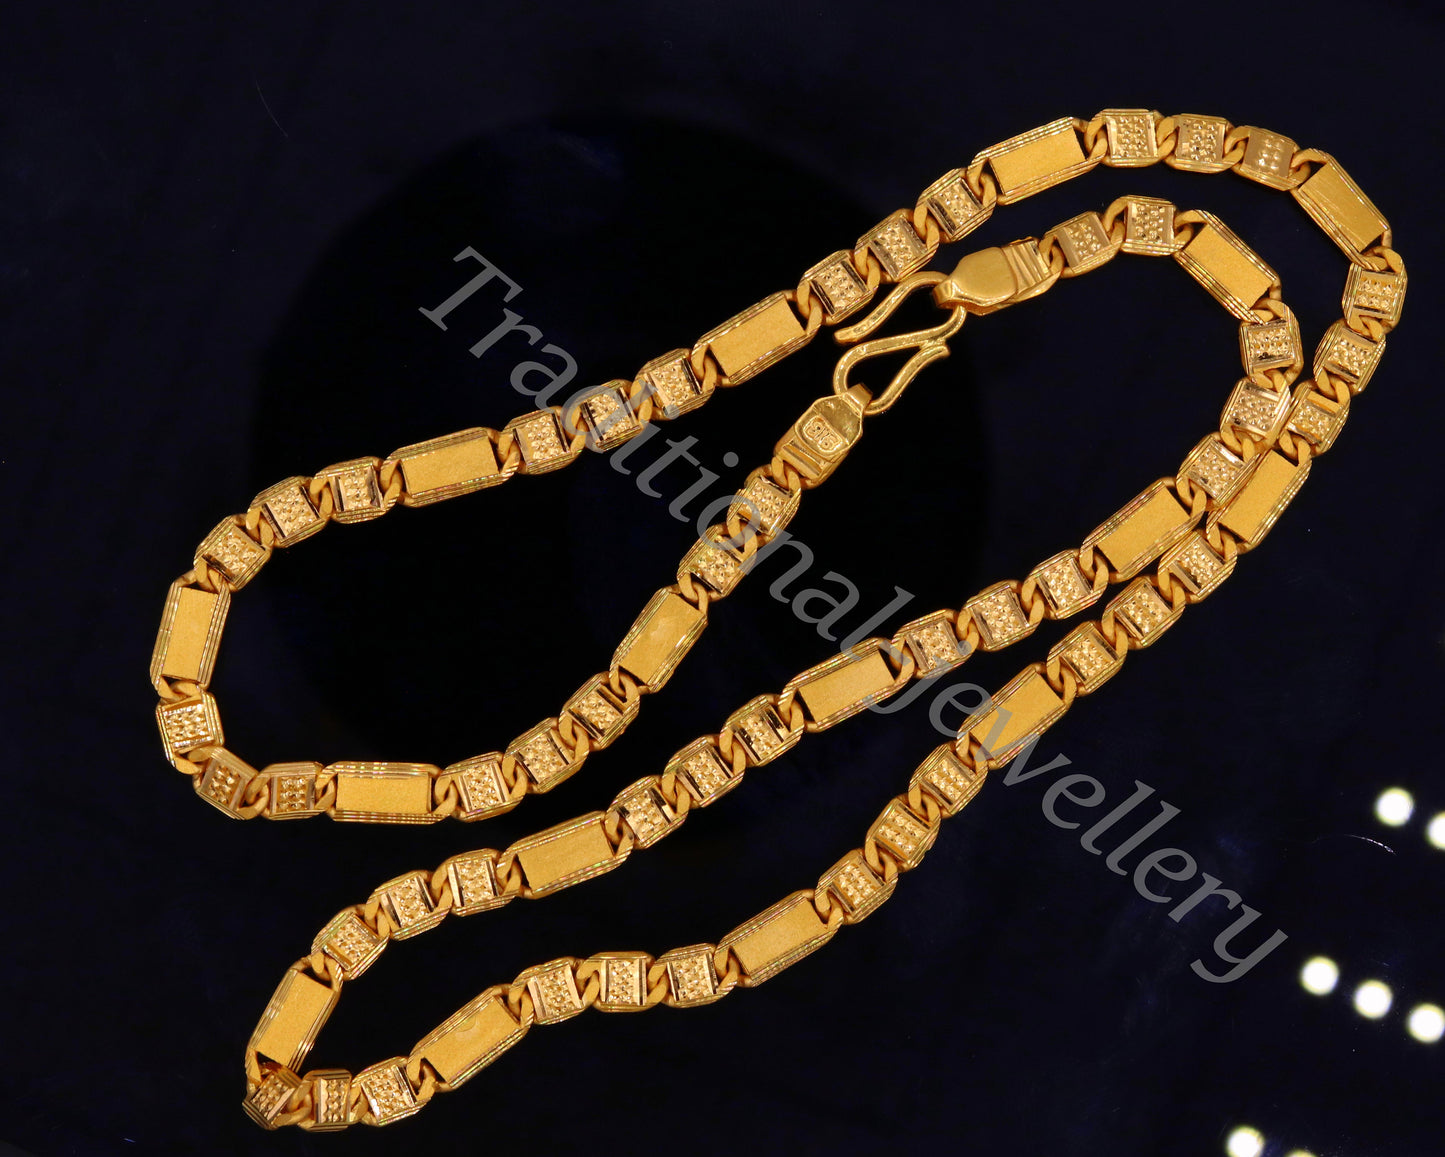 20 inches long handmade 22kt yellow gold royal navabi nawabi chain necklace gorgeous diamond cut design india jewelry for gifting - TRIBAL ORNAMENTS